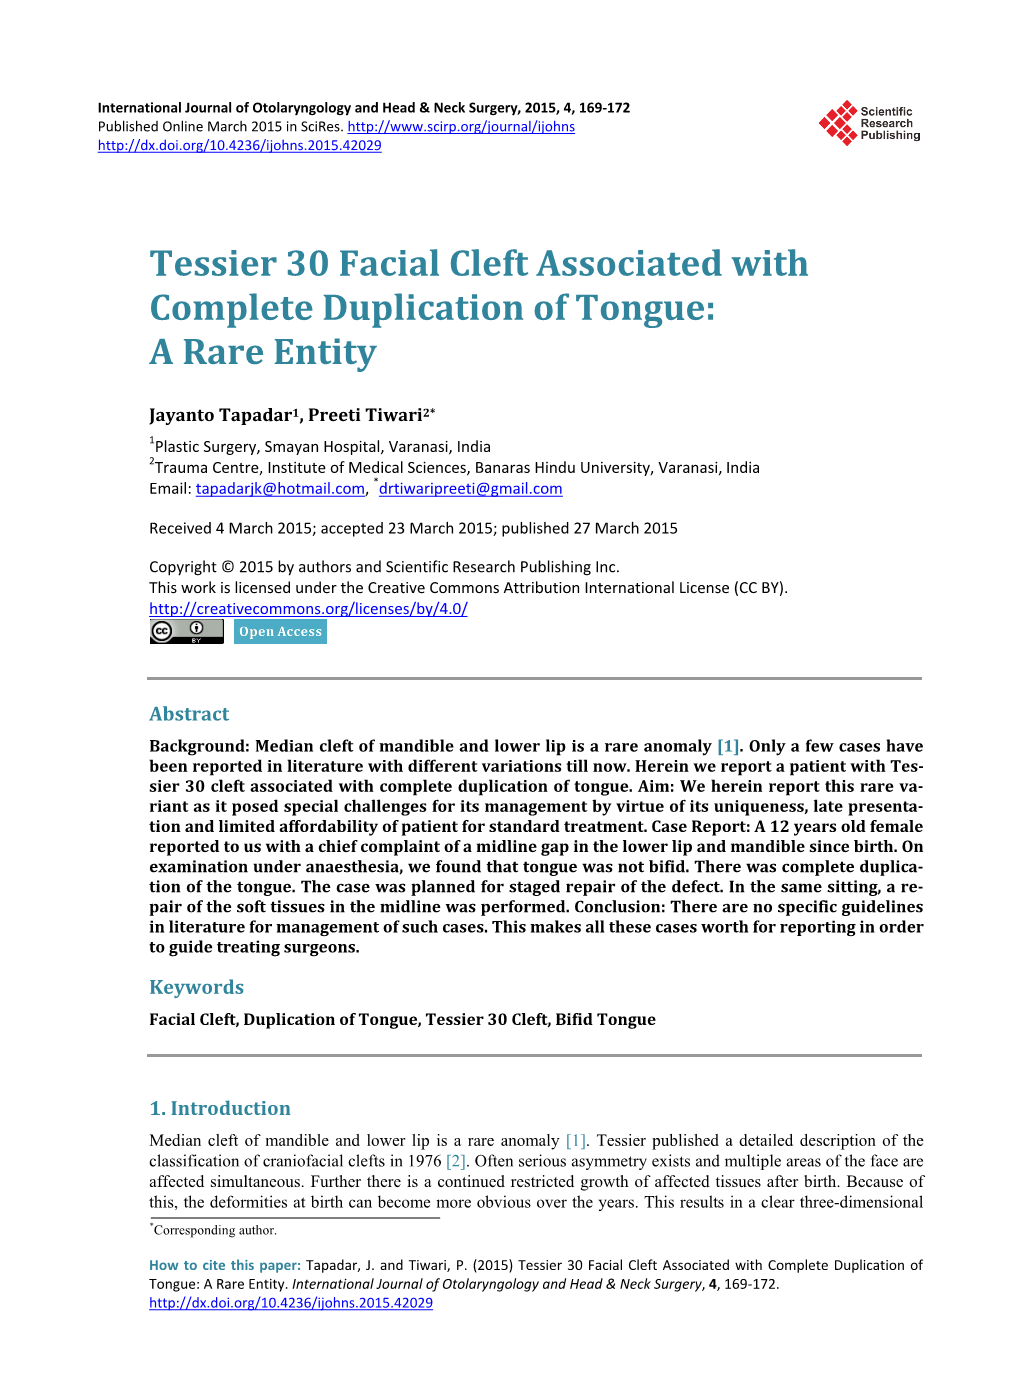 Tessier 30 Facial Cleft Associated with Complete Duplication of Tongue: a Rare Entity